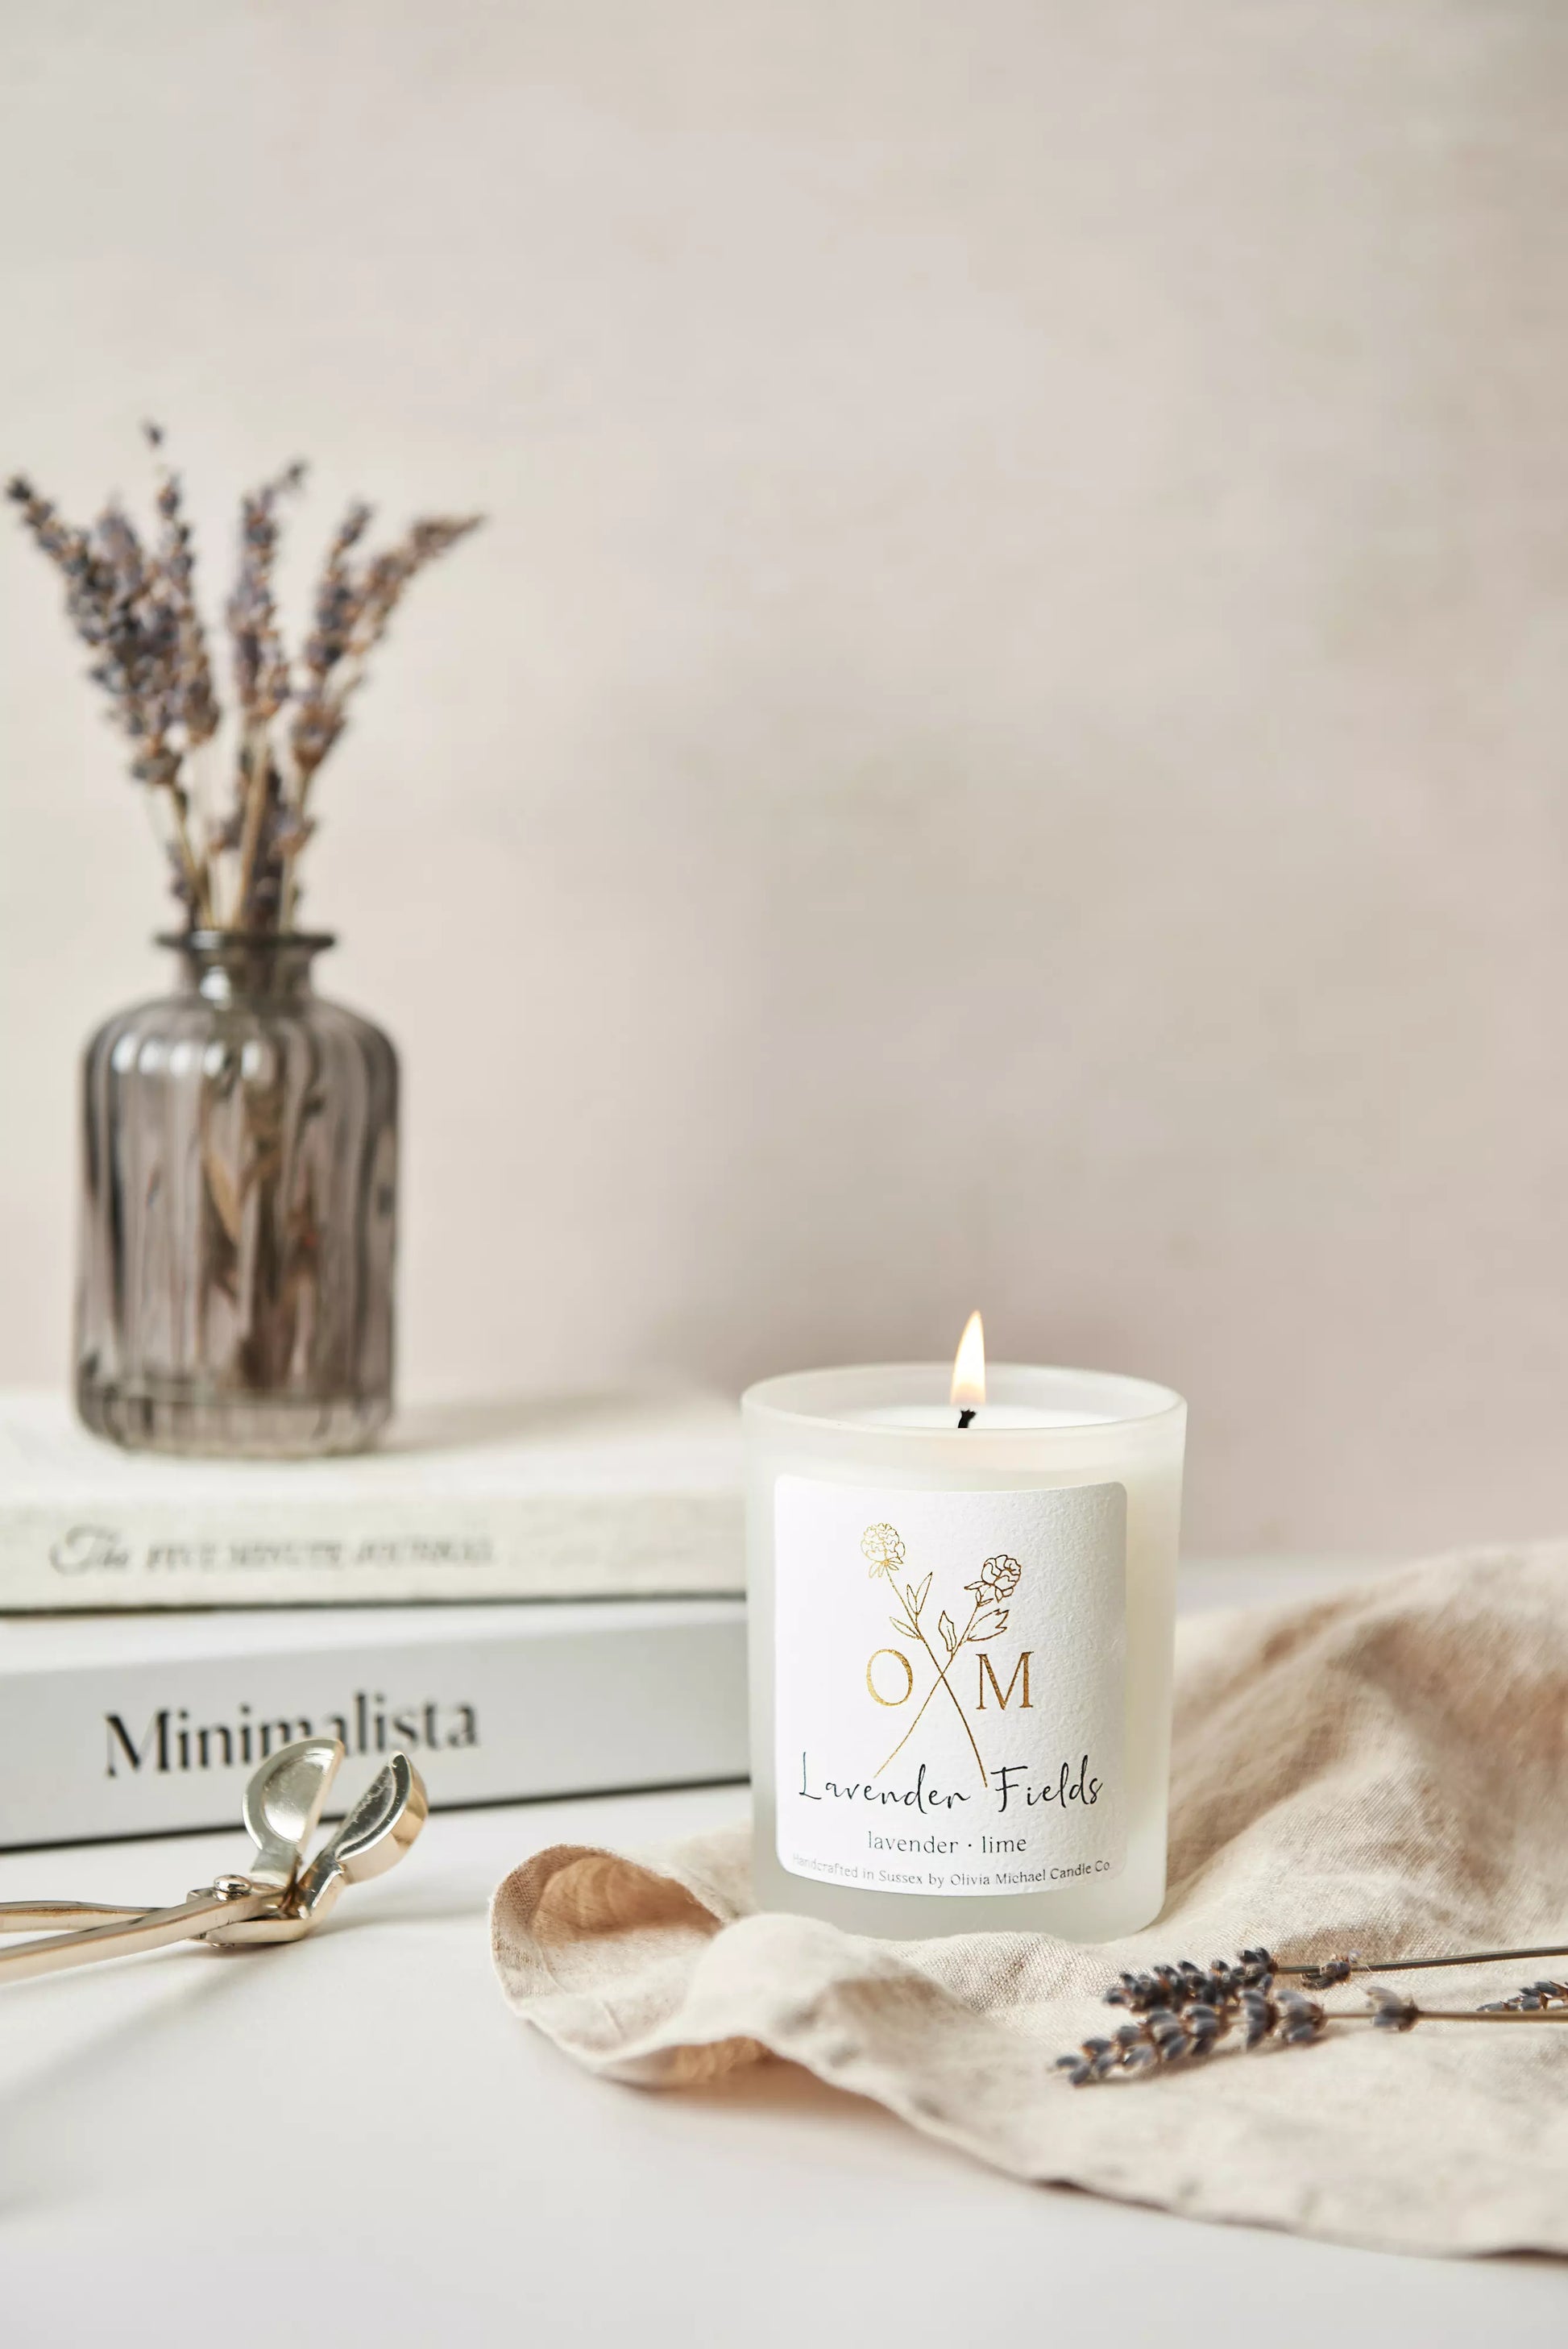 Our lavender aromatherapy candle is lit and on display in a clear frosted glass jar.